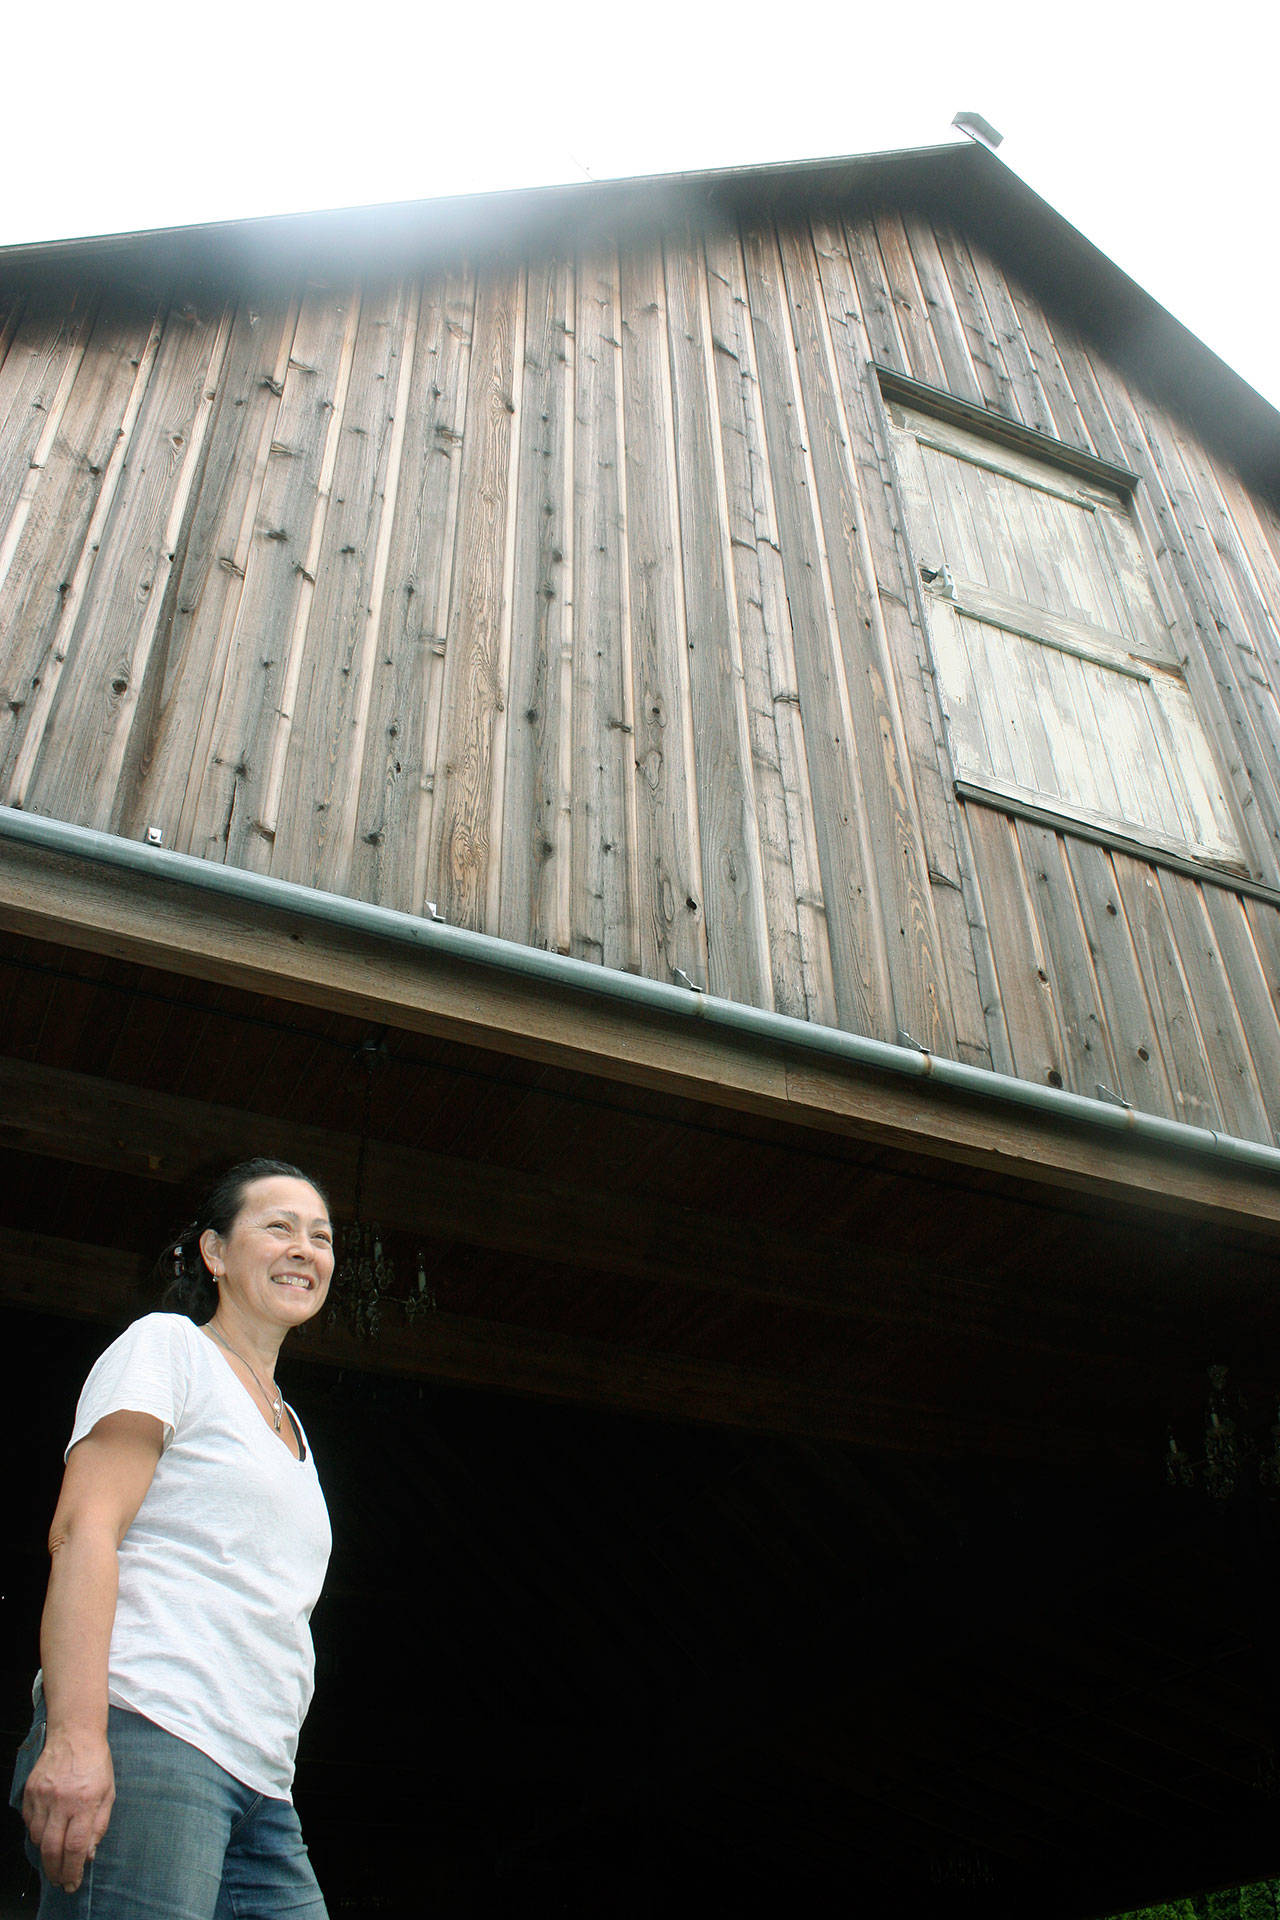 Linda Person looks on from the base of the Sidetrack Distillery Barn, built from the design and materials of historical barns in the Green River Valley. Doors recovered from a late-1800 barn grace the building. The Persons own and operate the barn as a venue for public events, along with the Lazy River Farm that feeds their small distillery. MARK KLAAS, Kent Reporter